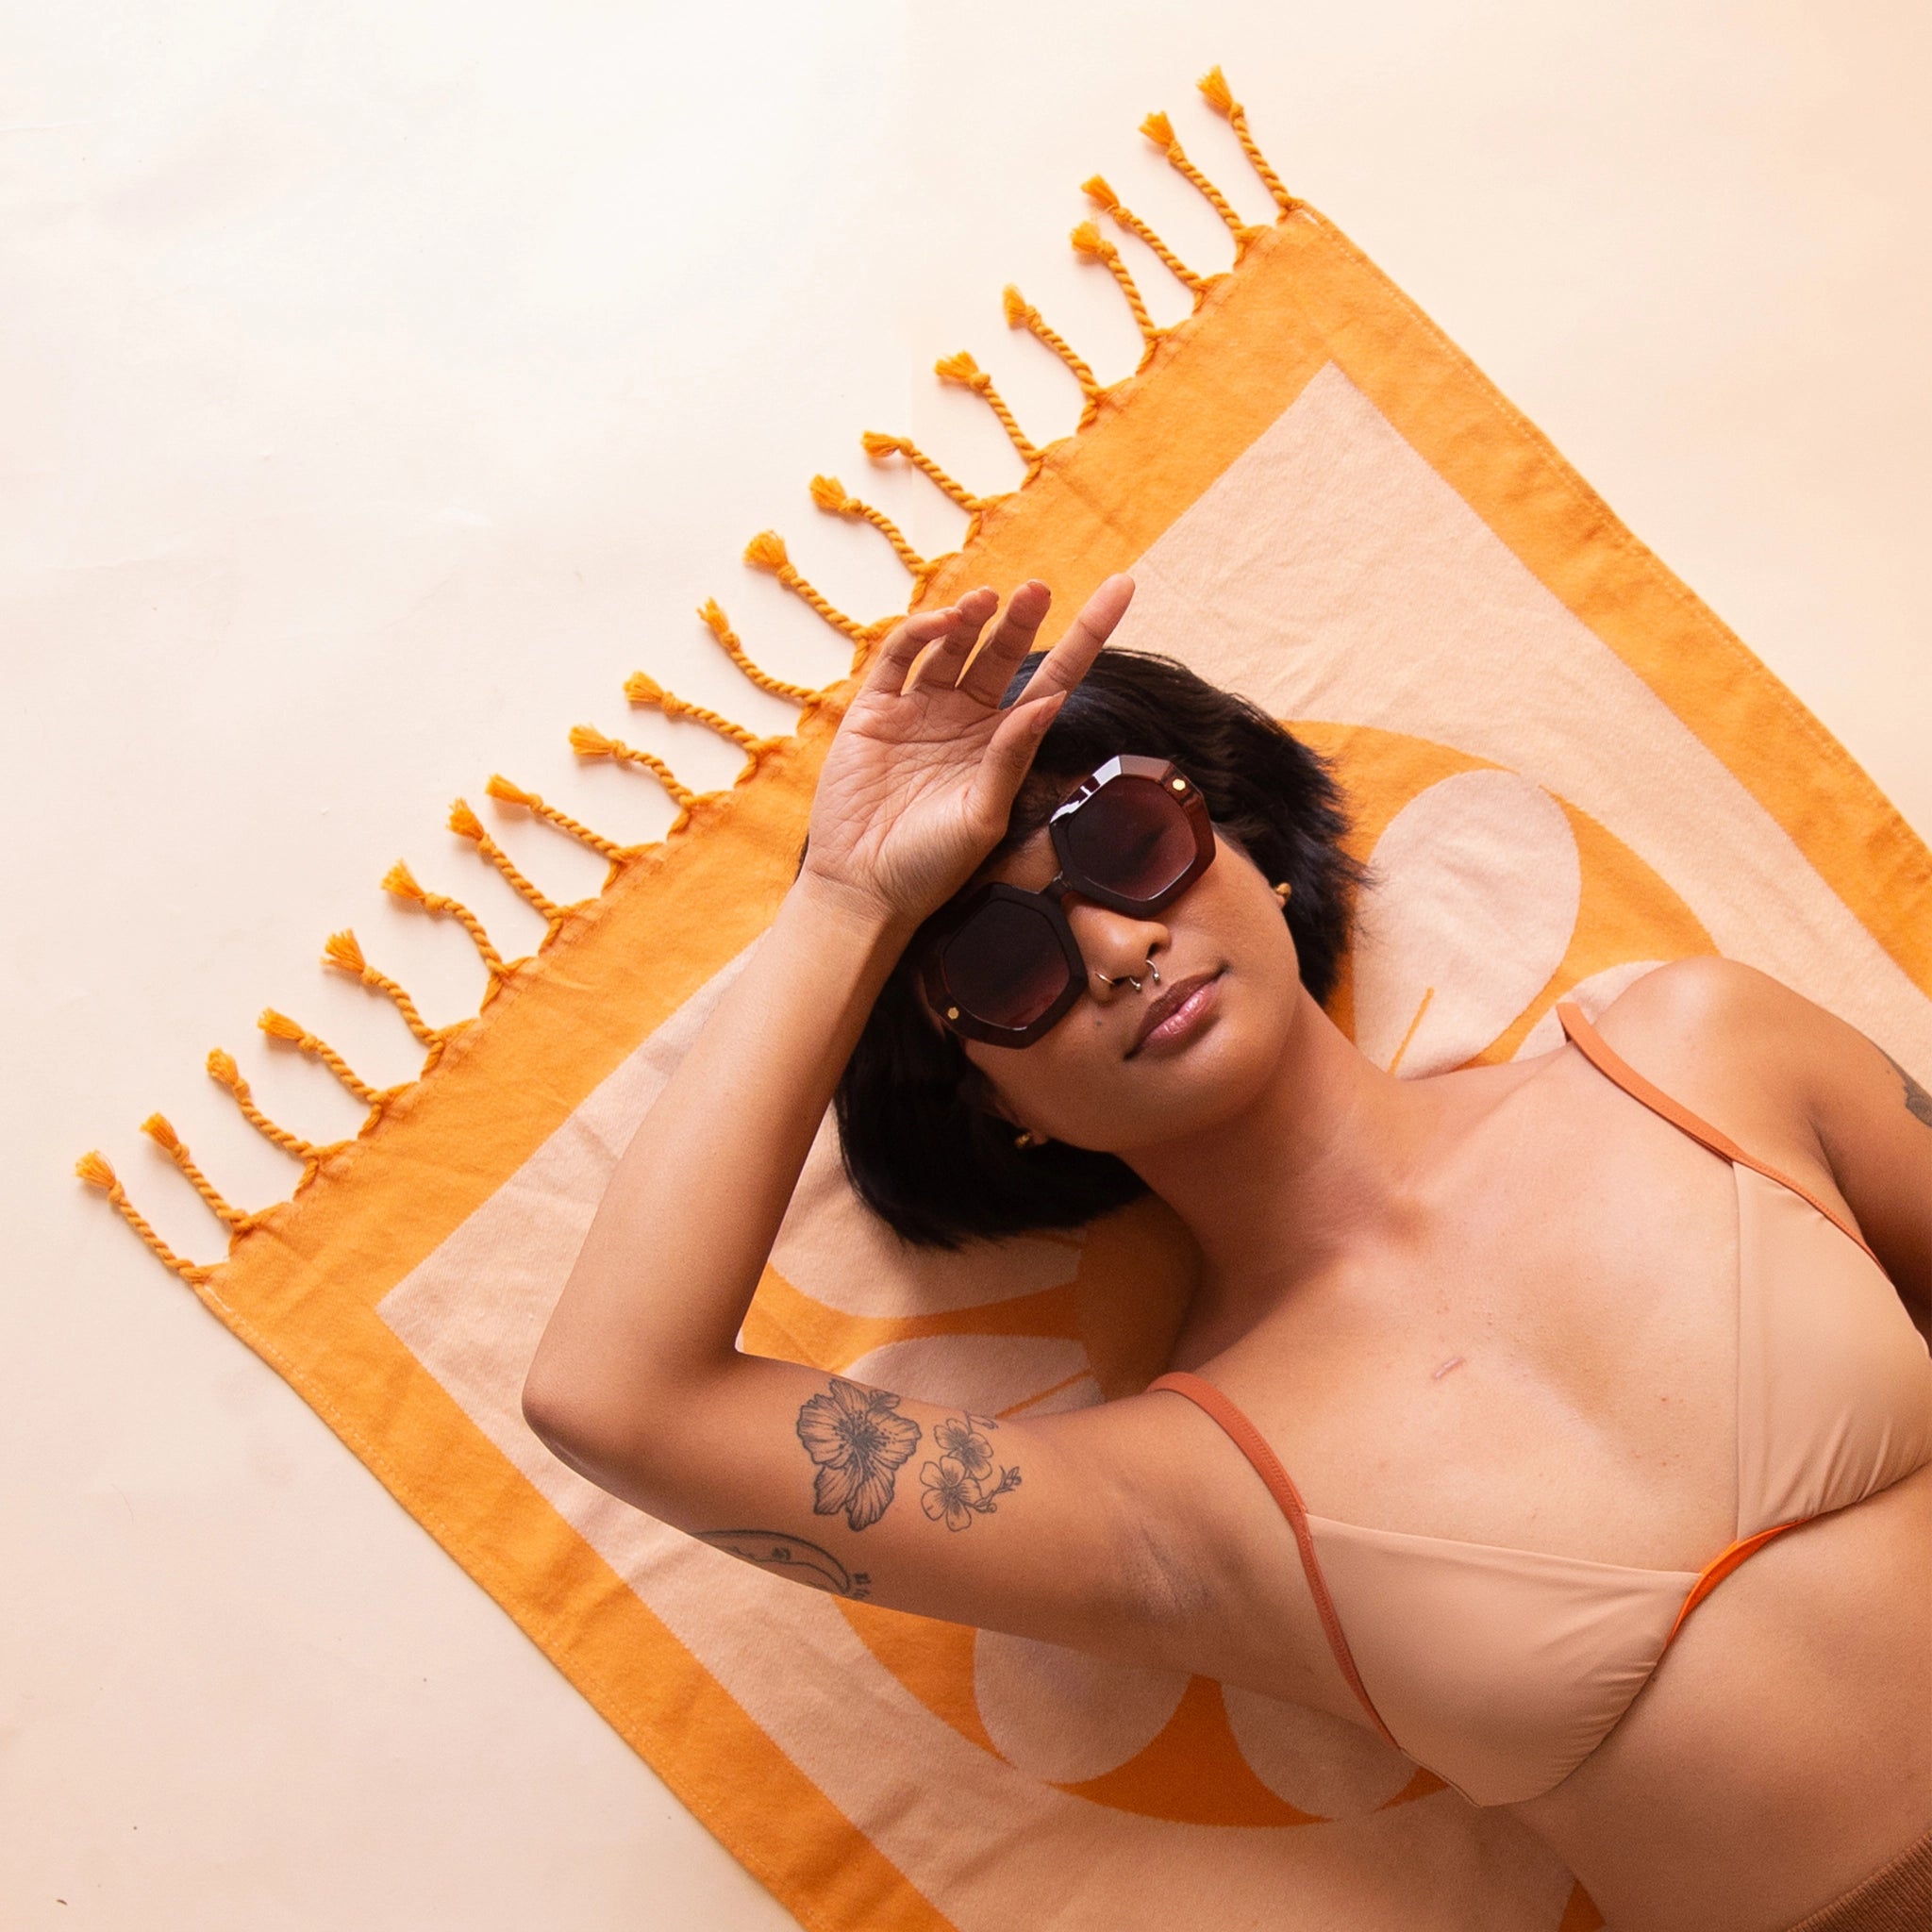 A model laying on the Retro Flower Beach Towel that has two tones of orange and peach along with orange string tassels on the end. 